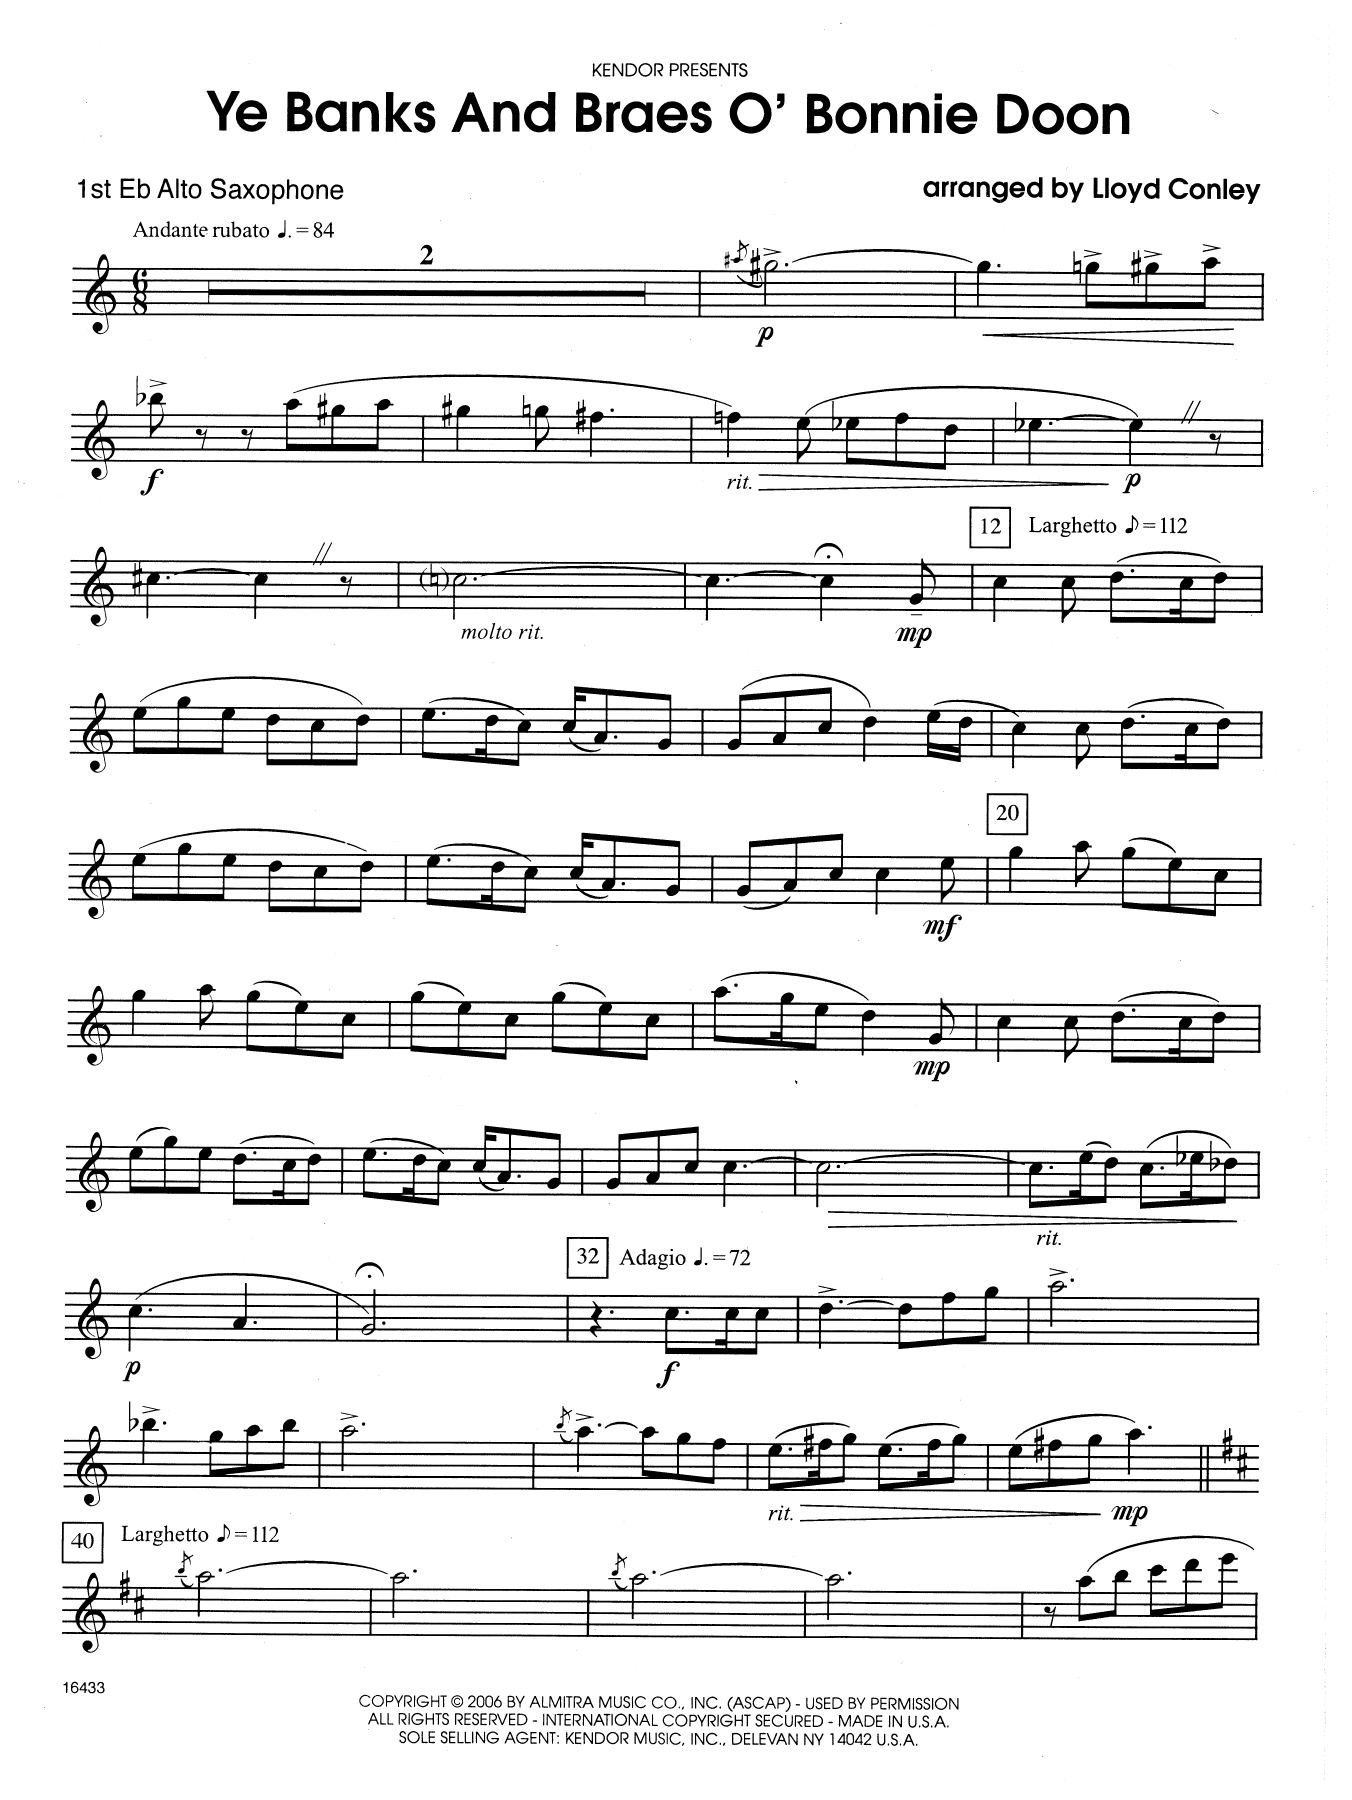 Lloyd Conley Ye Banks and Braes o' Bonnie Doon - 1st Eb Alto Saxophone sheet music notes and chords. Download Printable PDF.